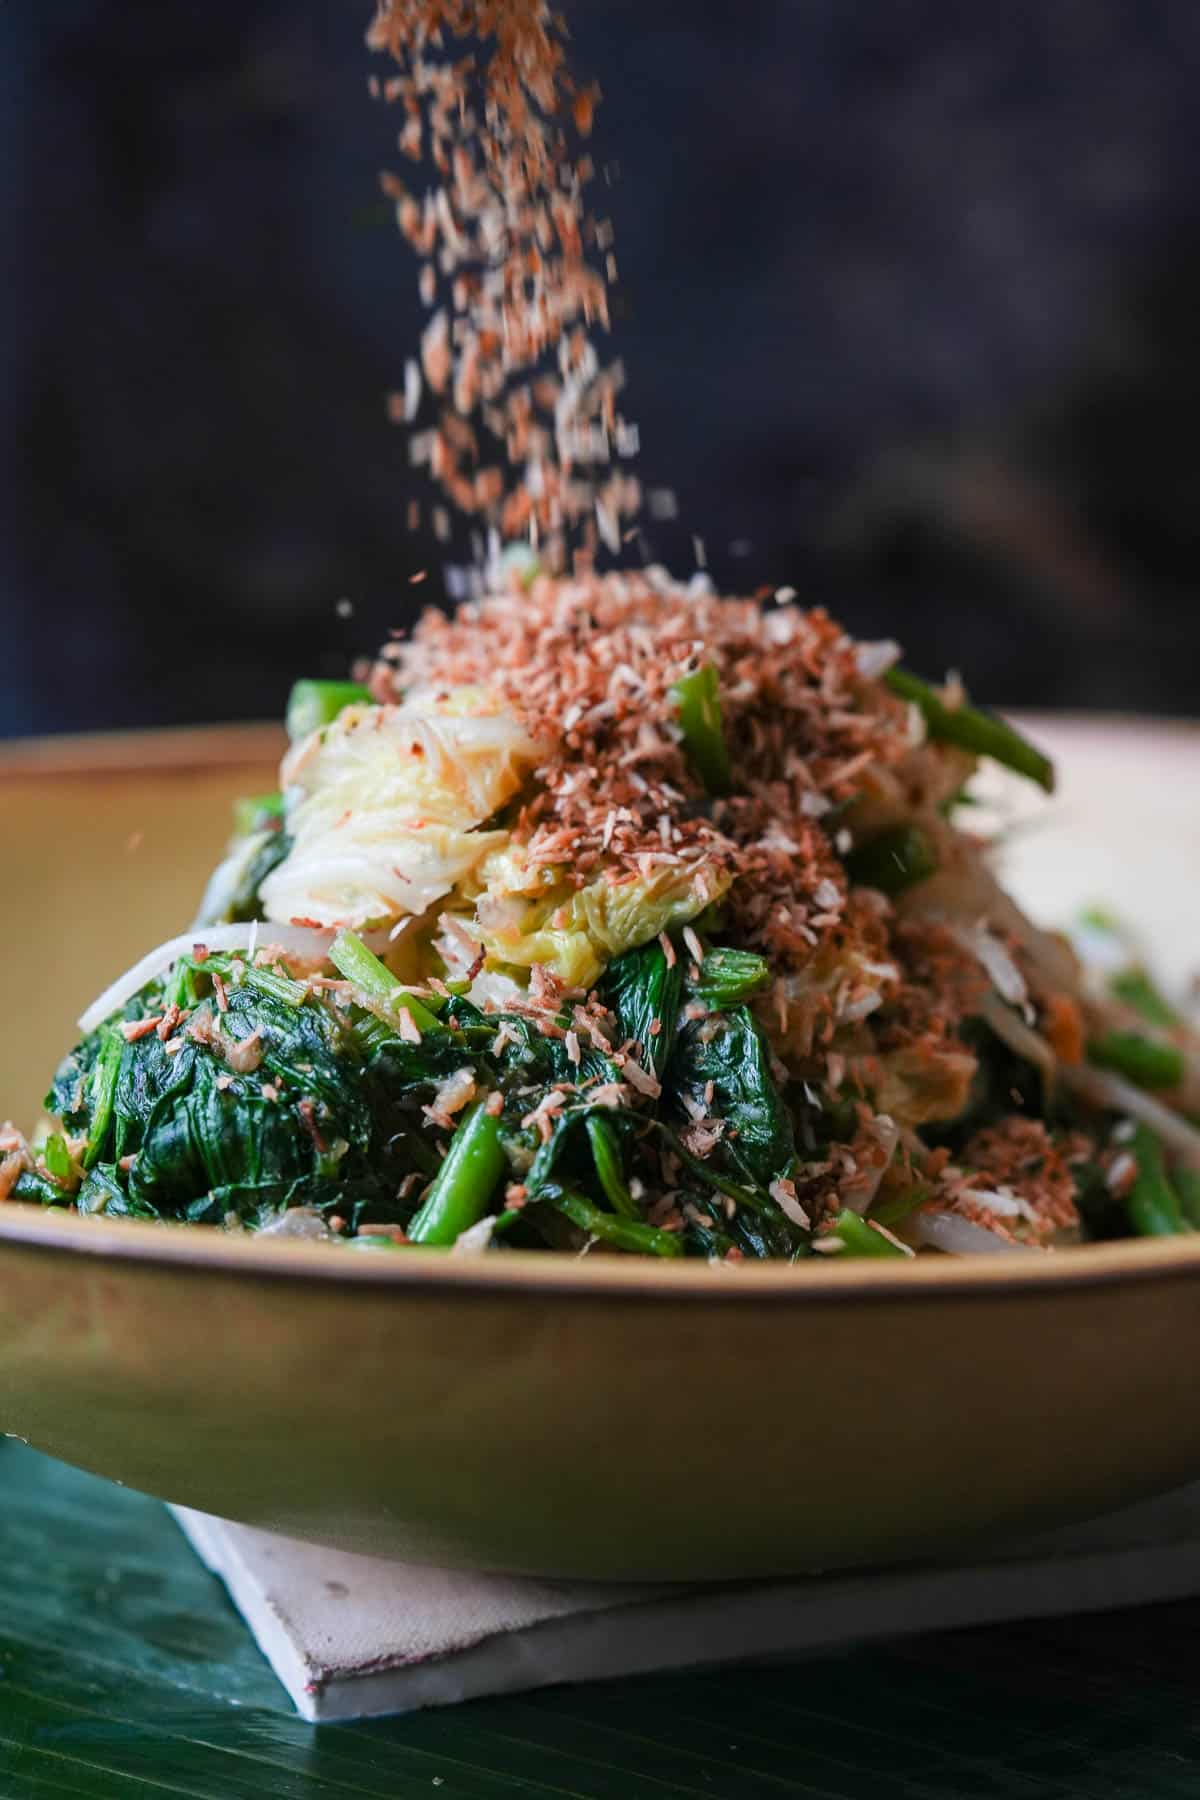 A bowl of Urap Sayur with seasoned toasted coconut sprinkled on top.